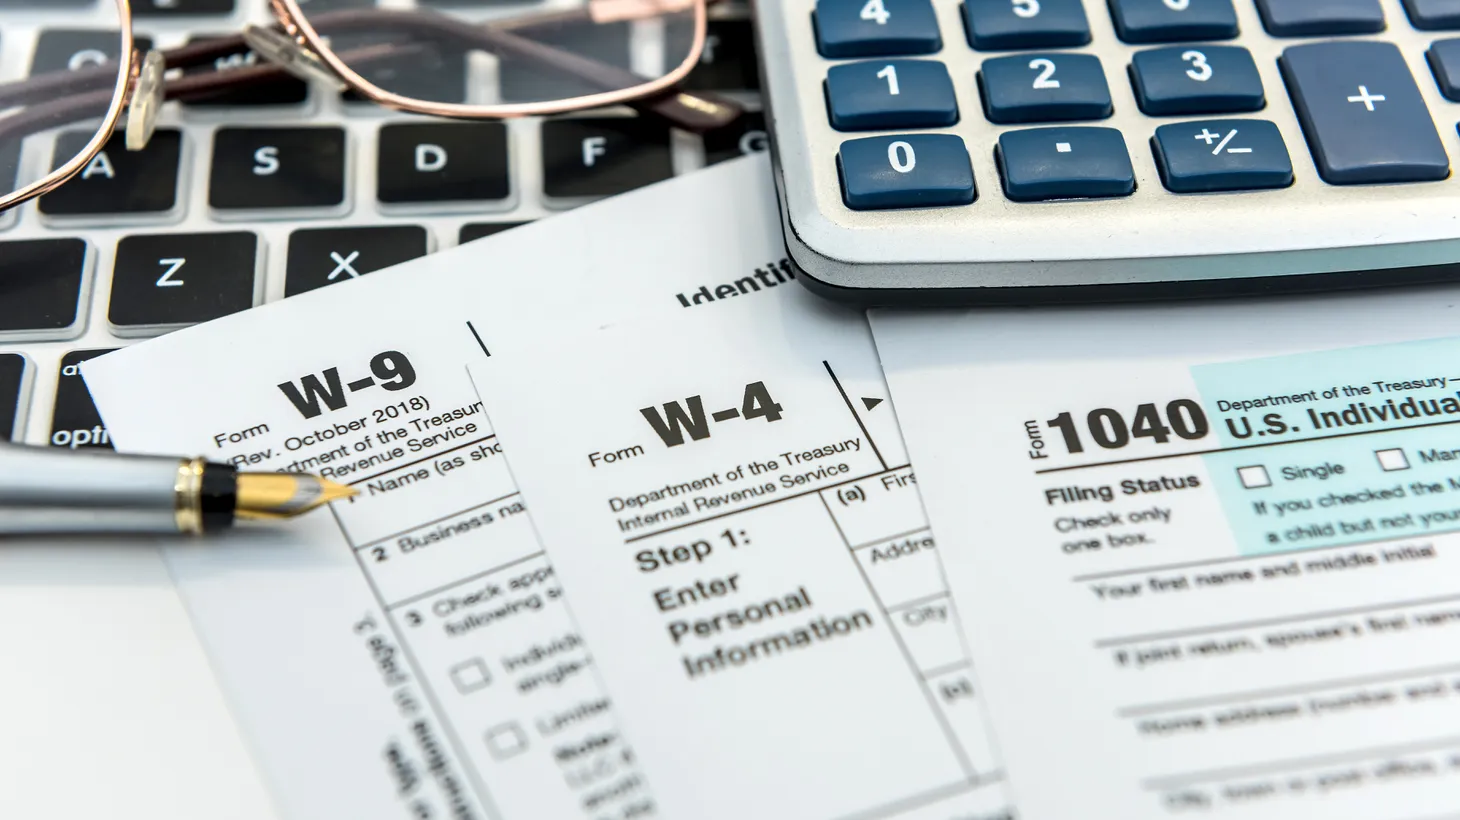 How soon will you receive your tax return? About 21 days if you have a straightforward return, file electronically, and request direct deposit.